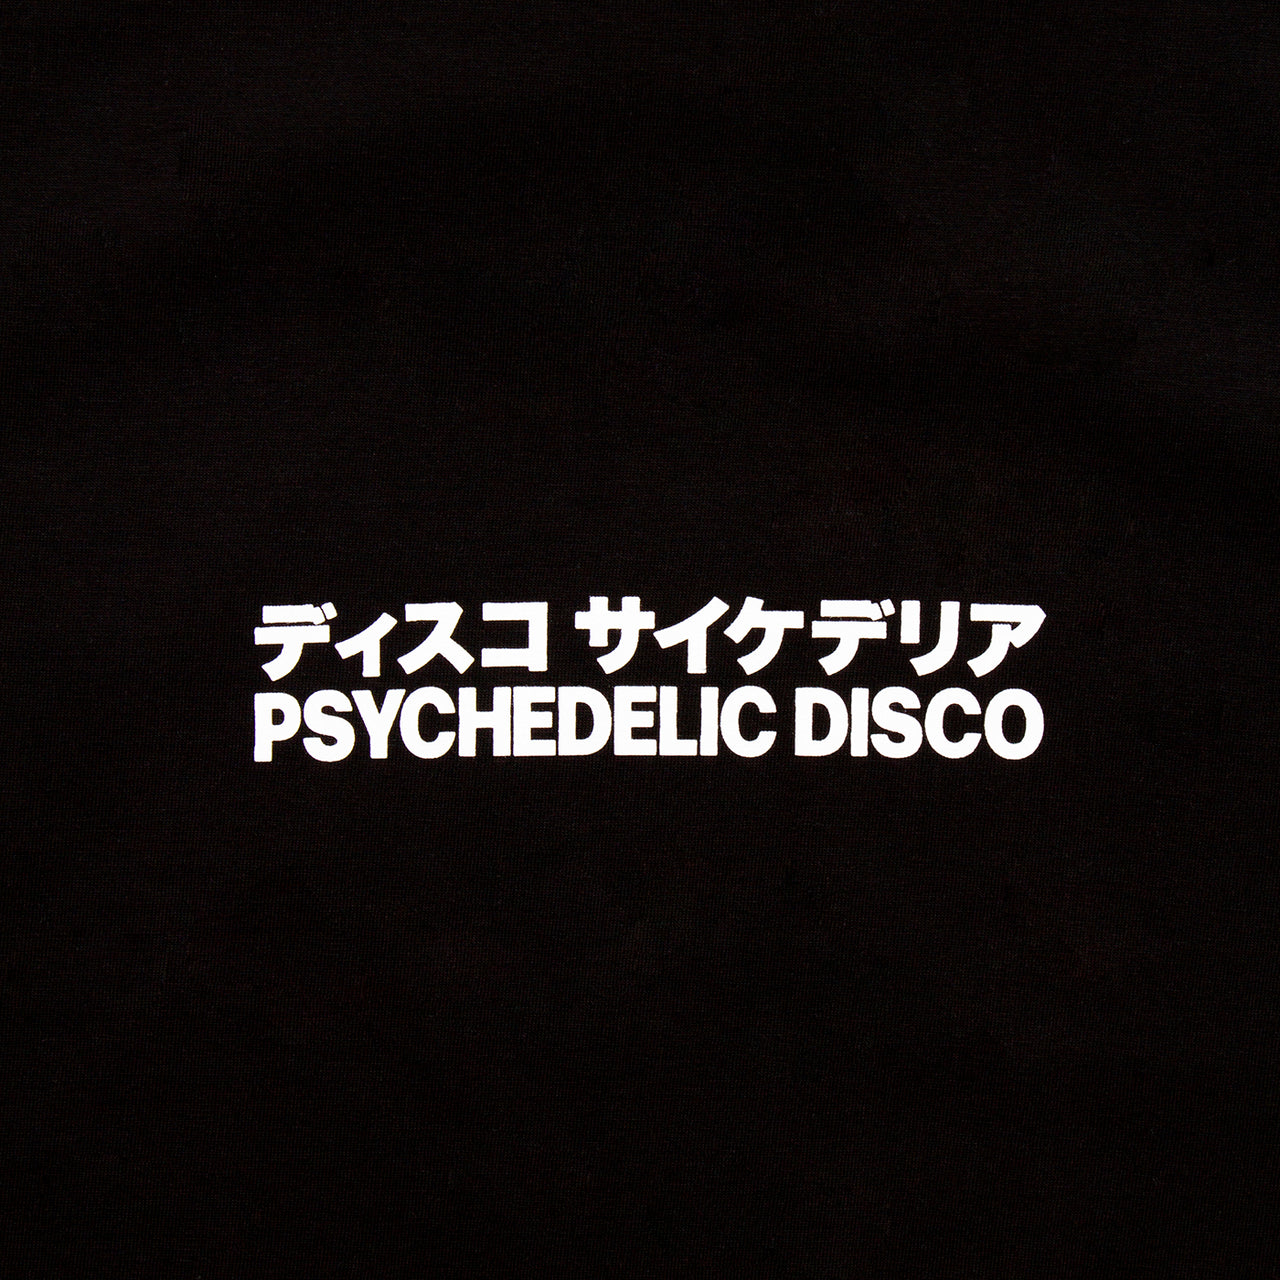 PD Middle Psychedelic Disco - Tshirt - Black